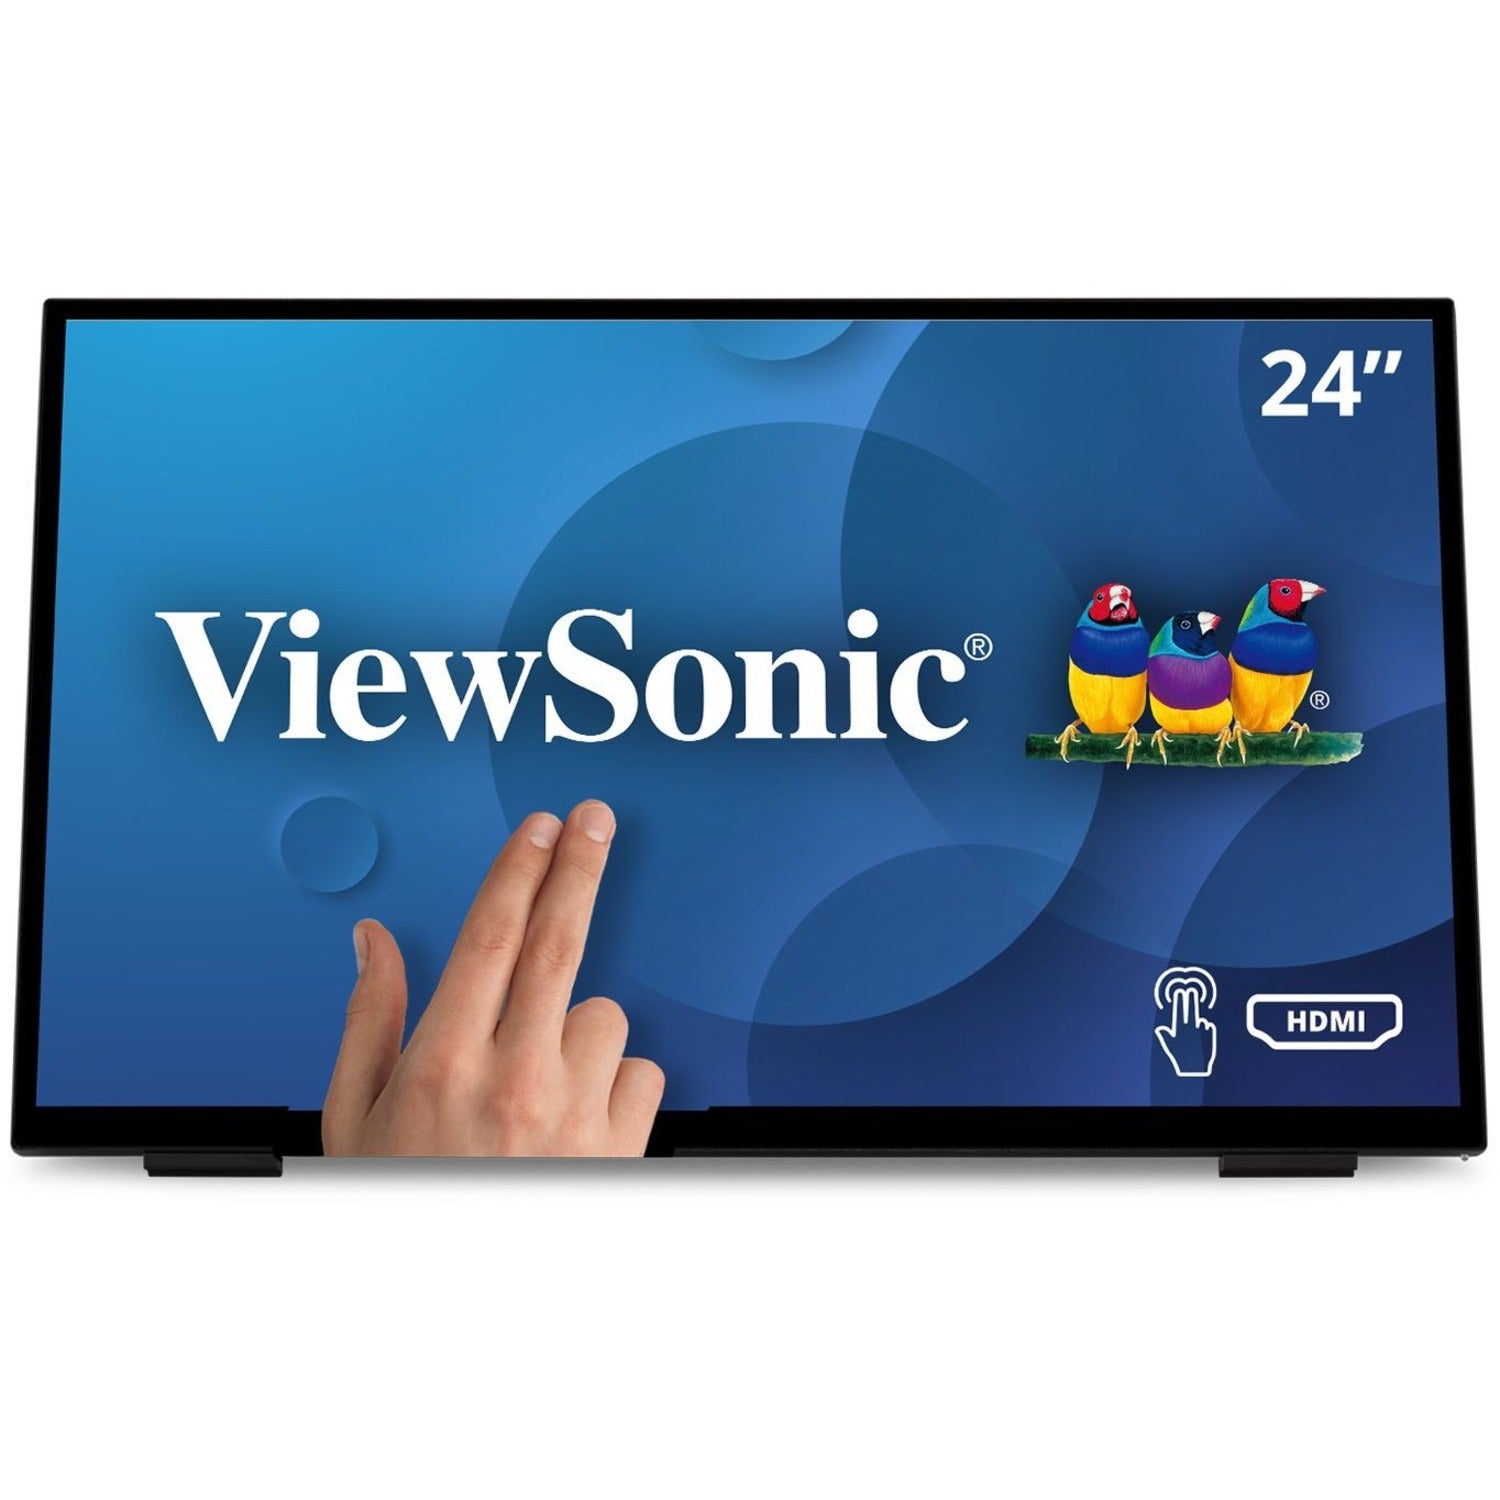 ViewSonic TD2465 24 Inch 1080p Touch Screen Monitor with Advanced Ergonomics, HDMI and USB Inputs - TD2465